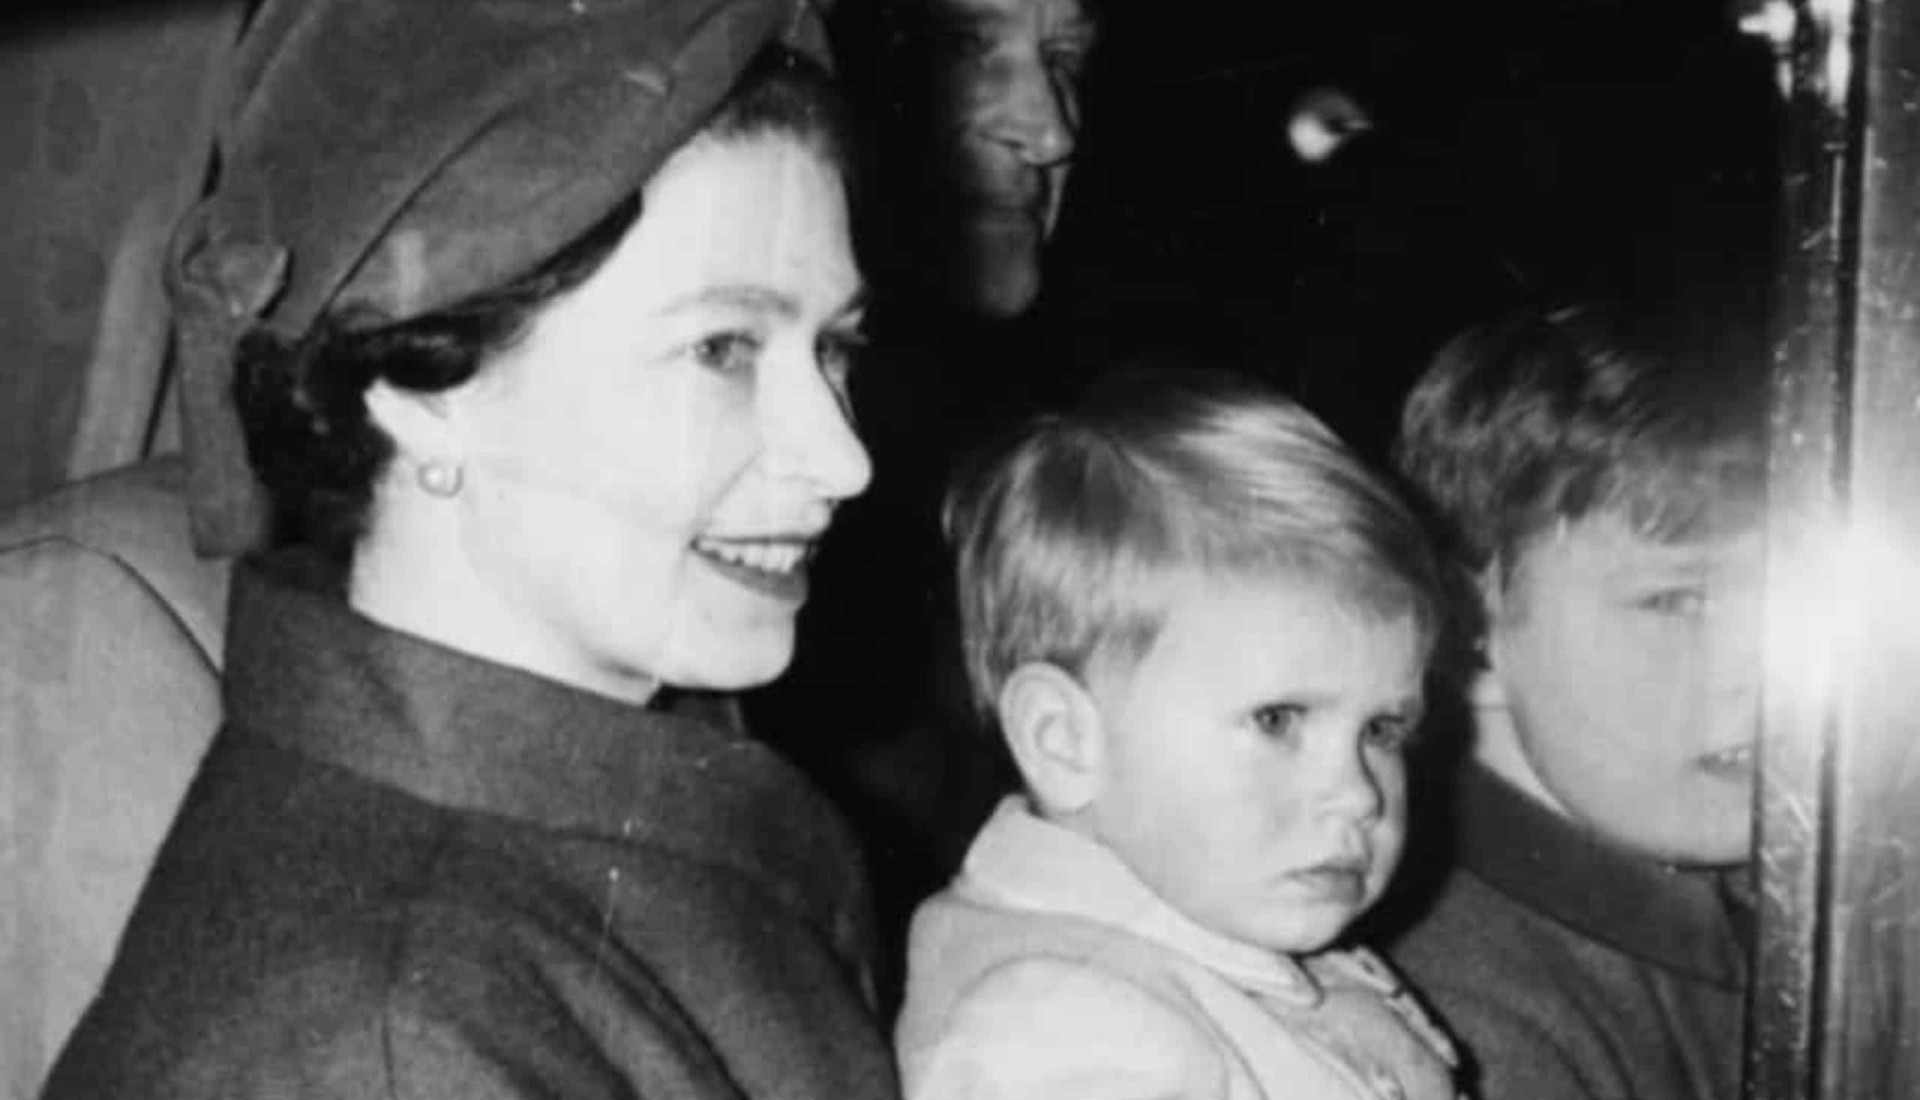 <p>Princess Elizabeth was born on April 21, 1926, and ascended the British throne on February 6, 1952, at just 25 years of age, to become Queen Elizabeth II. Alongside her royal duties, she was a wife of over 70 years and a mother to four. Her Royal Highness managed to successfully fulfill her inherited responsibilities for 70 years, making her the longest-reigning British monarch. Sadly, she passed away on September 8, 2022, when she was 96 years old. <br><br>In honor of the late monarch, browse this gallery and take a look back at the early days of her life, captured in these fascinating historical photos.</p><p>You may also like: </p>